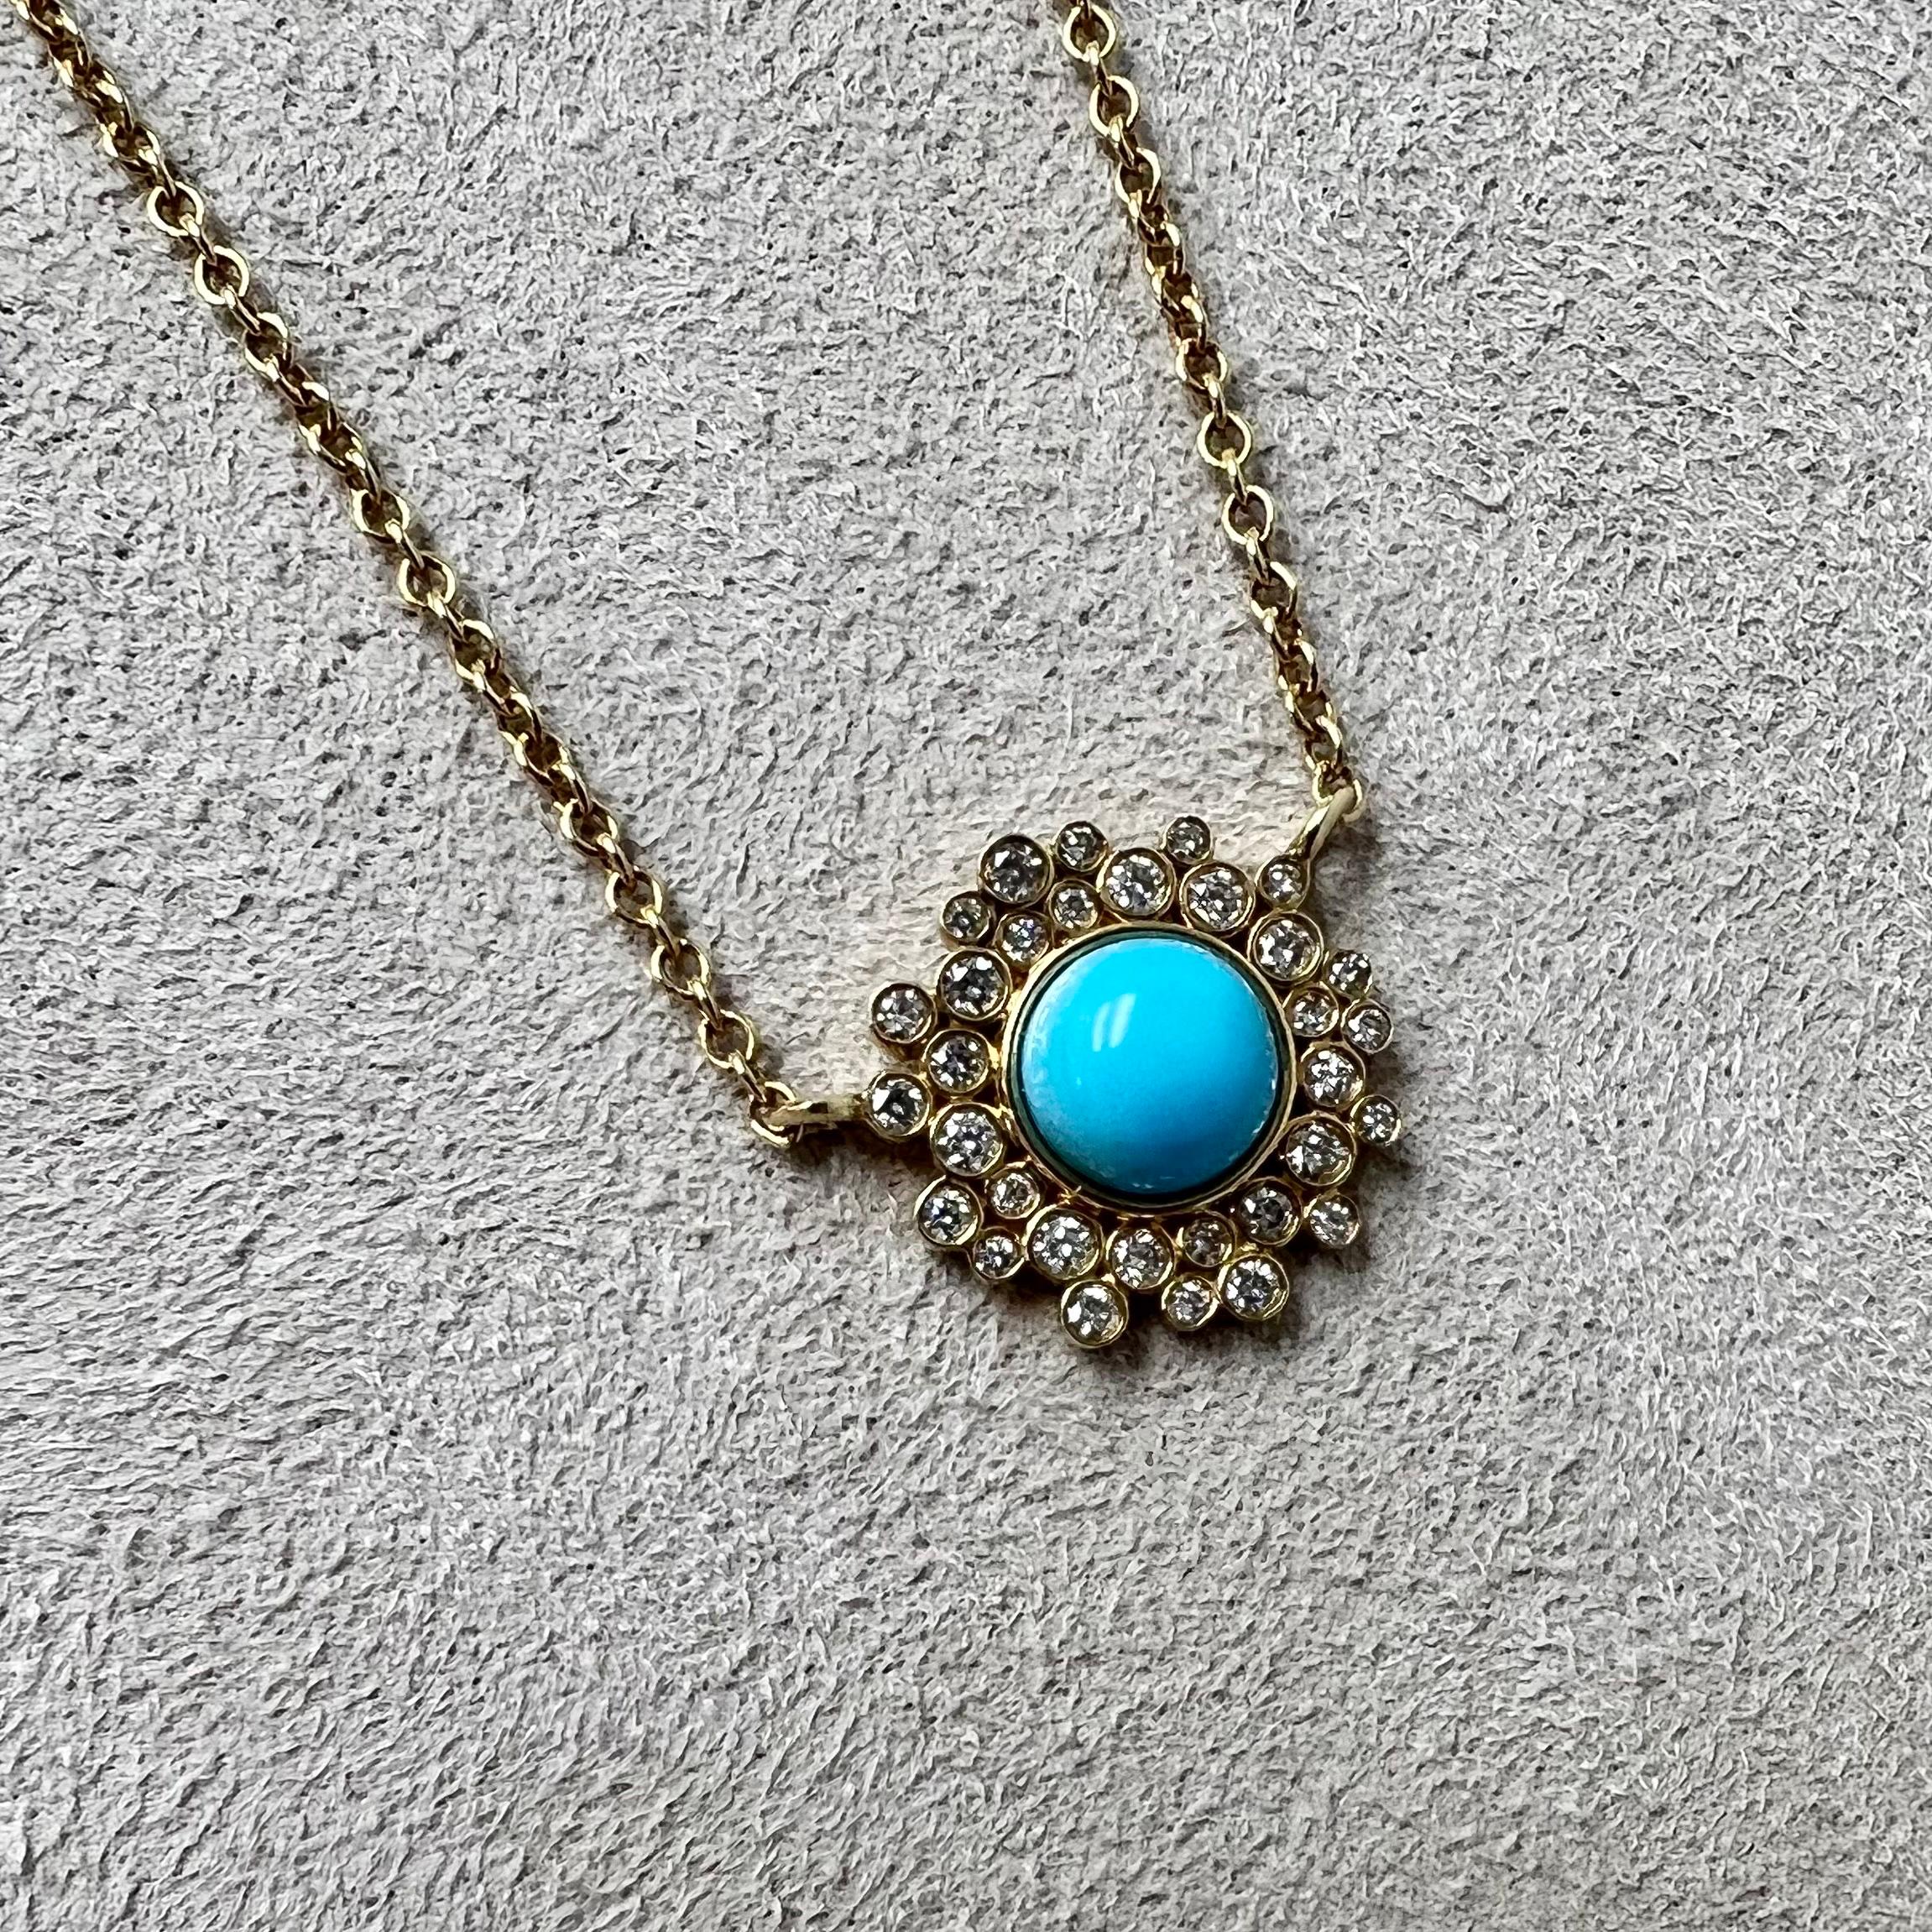 Created in 18 karat yellow gold
Turquoise 2 carats approx.
Diamonds 0.30 carat approx.
18 inch length, adjustable at 16-17
Lobster clasp
Limited edition

Crafted from 18 karat yellow gold, this limited edition necklace features approximately two